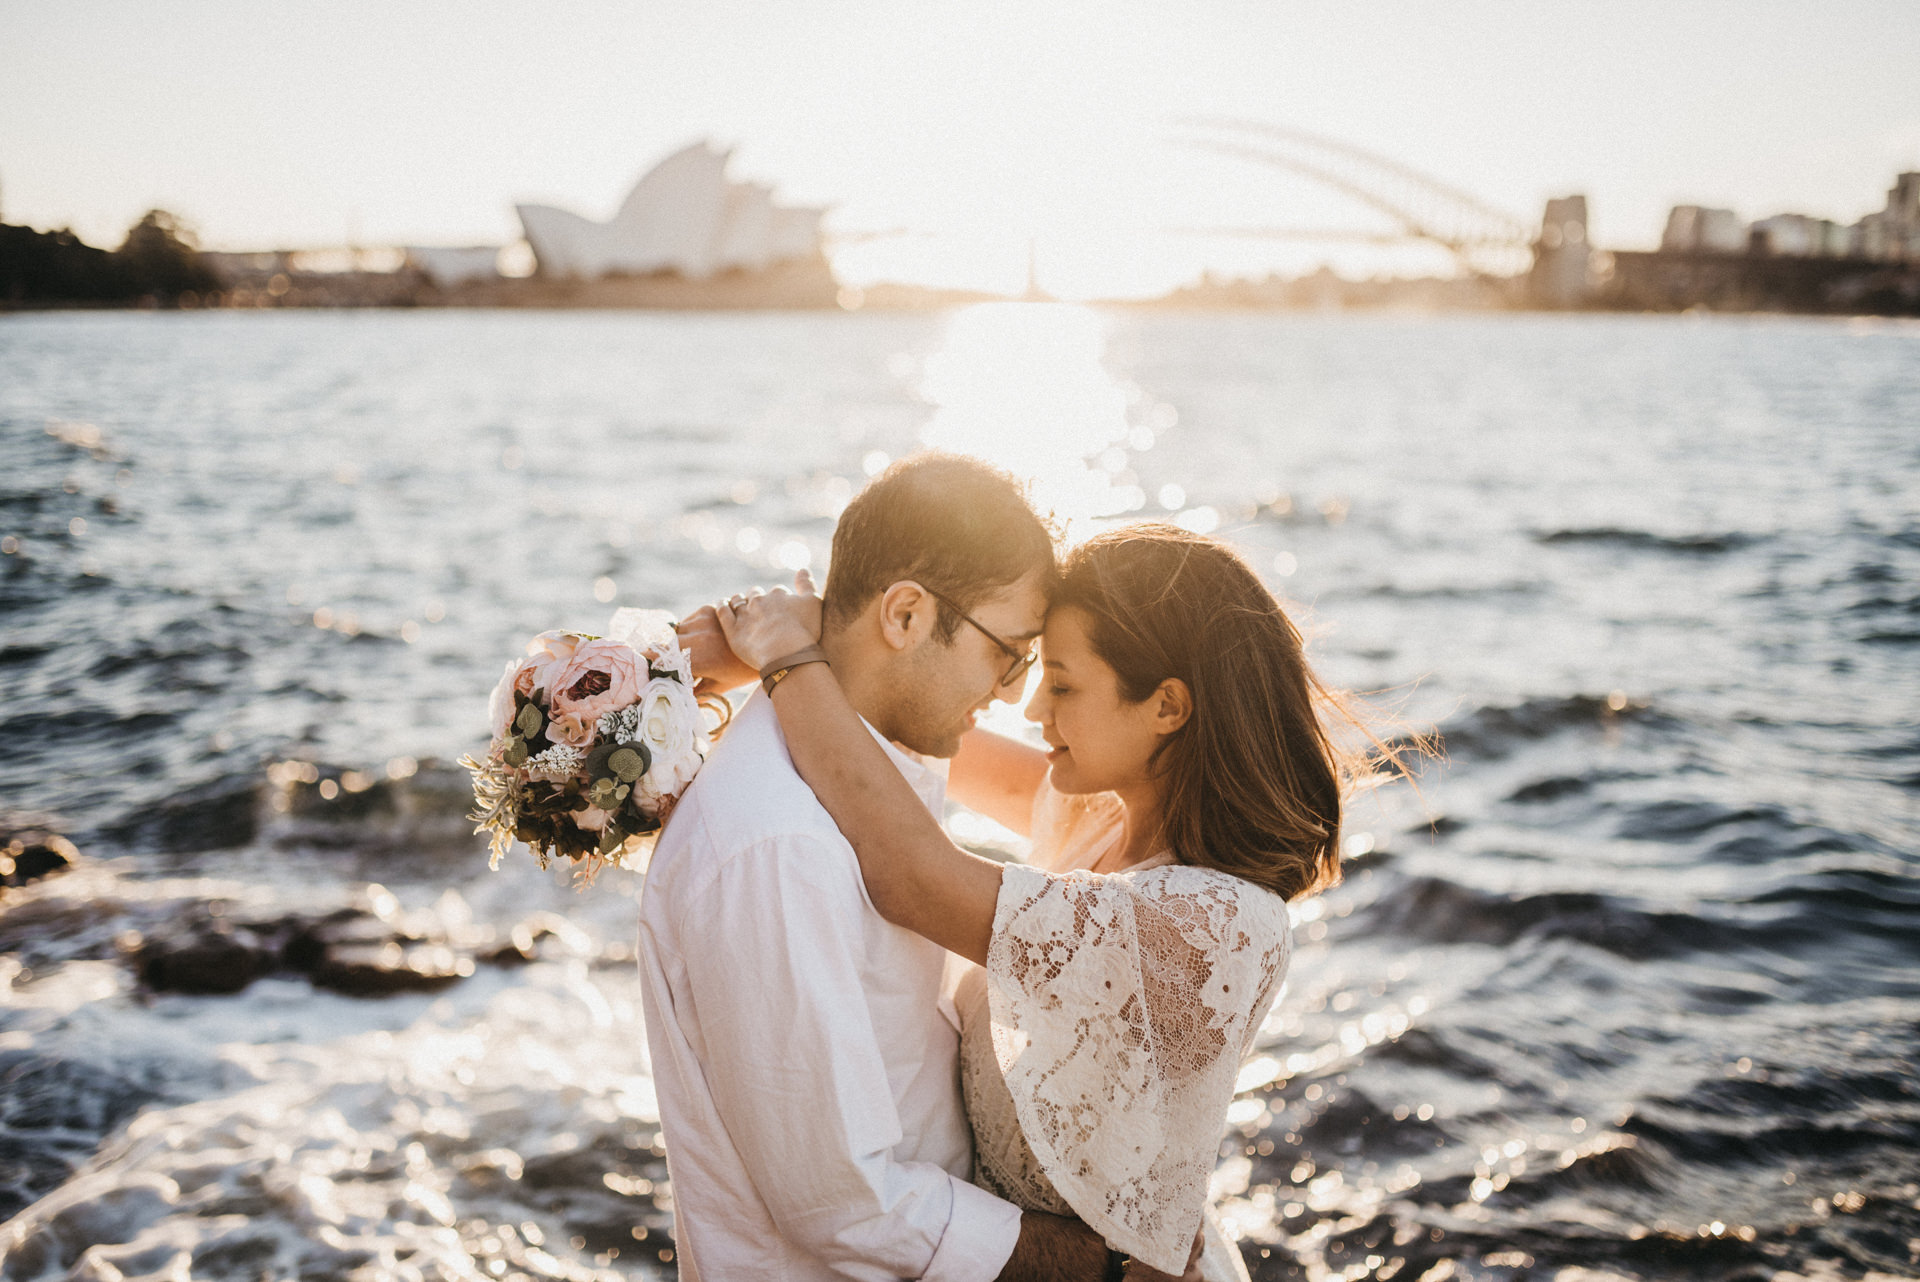 Mrs Macquarie's Chair engagement session